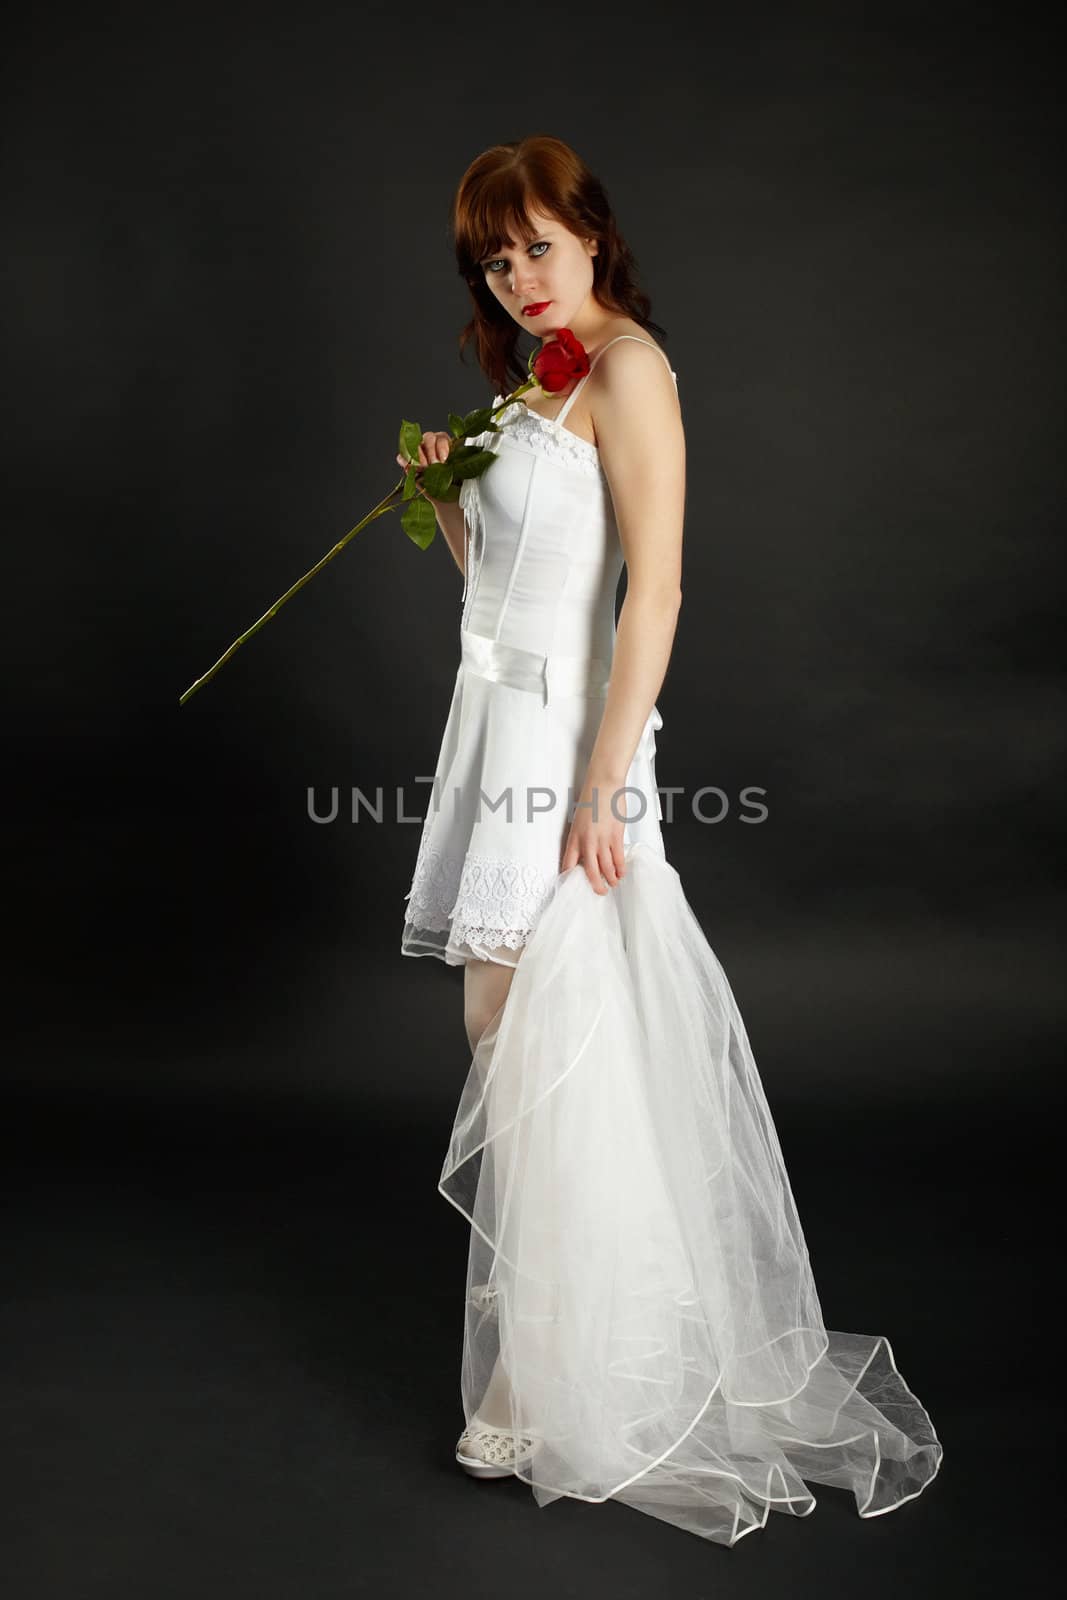 Bride with rose and veil on black background by pzaxe